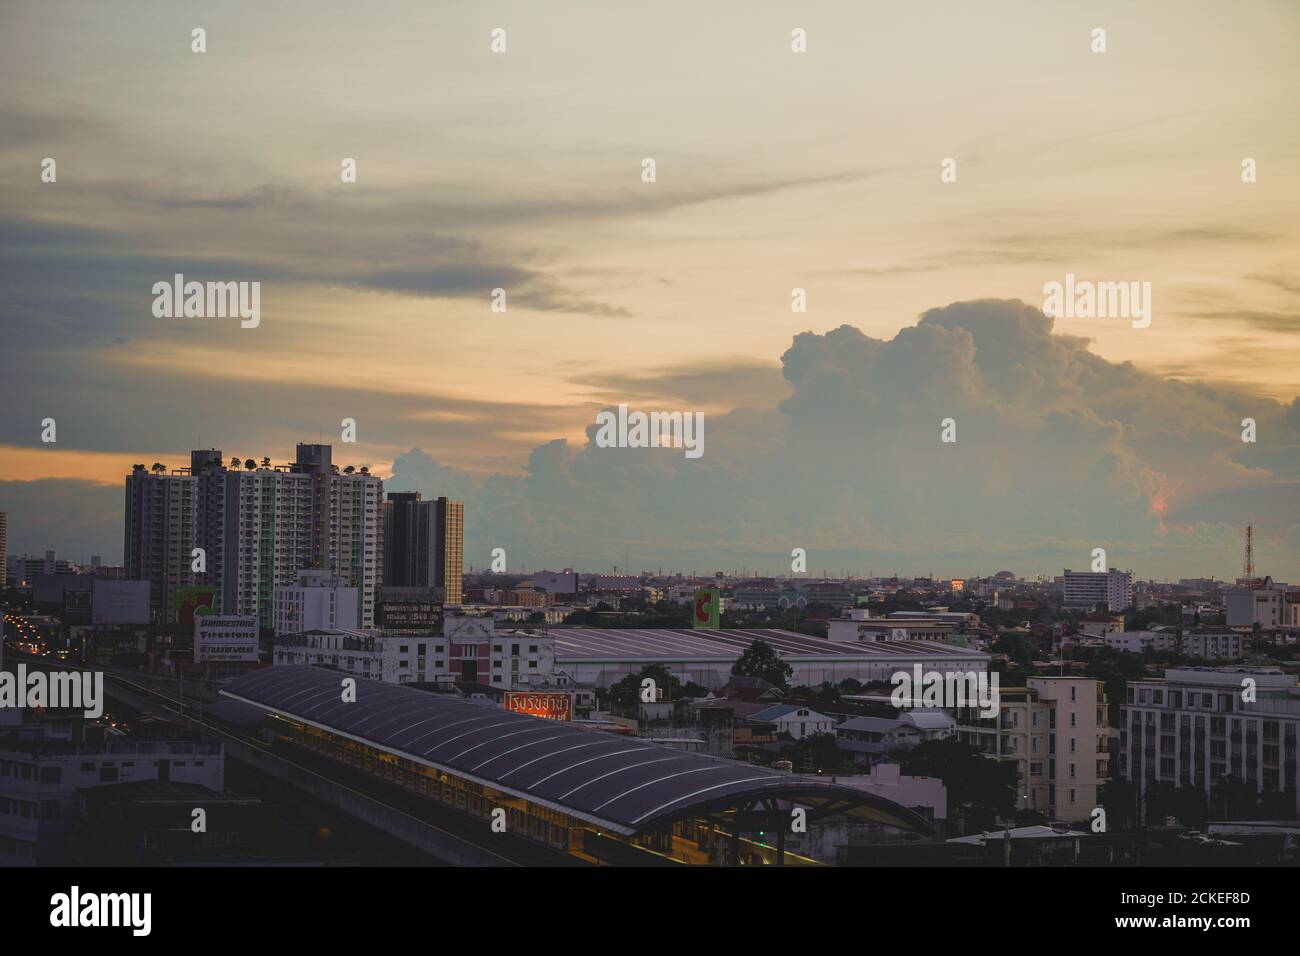 Buiding and the sunset sky view in downtown Stock Photo